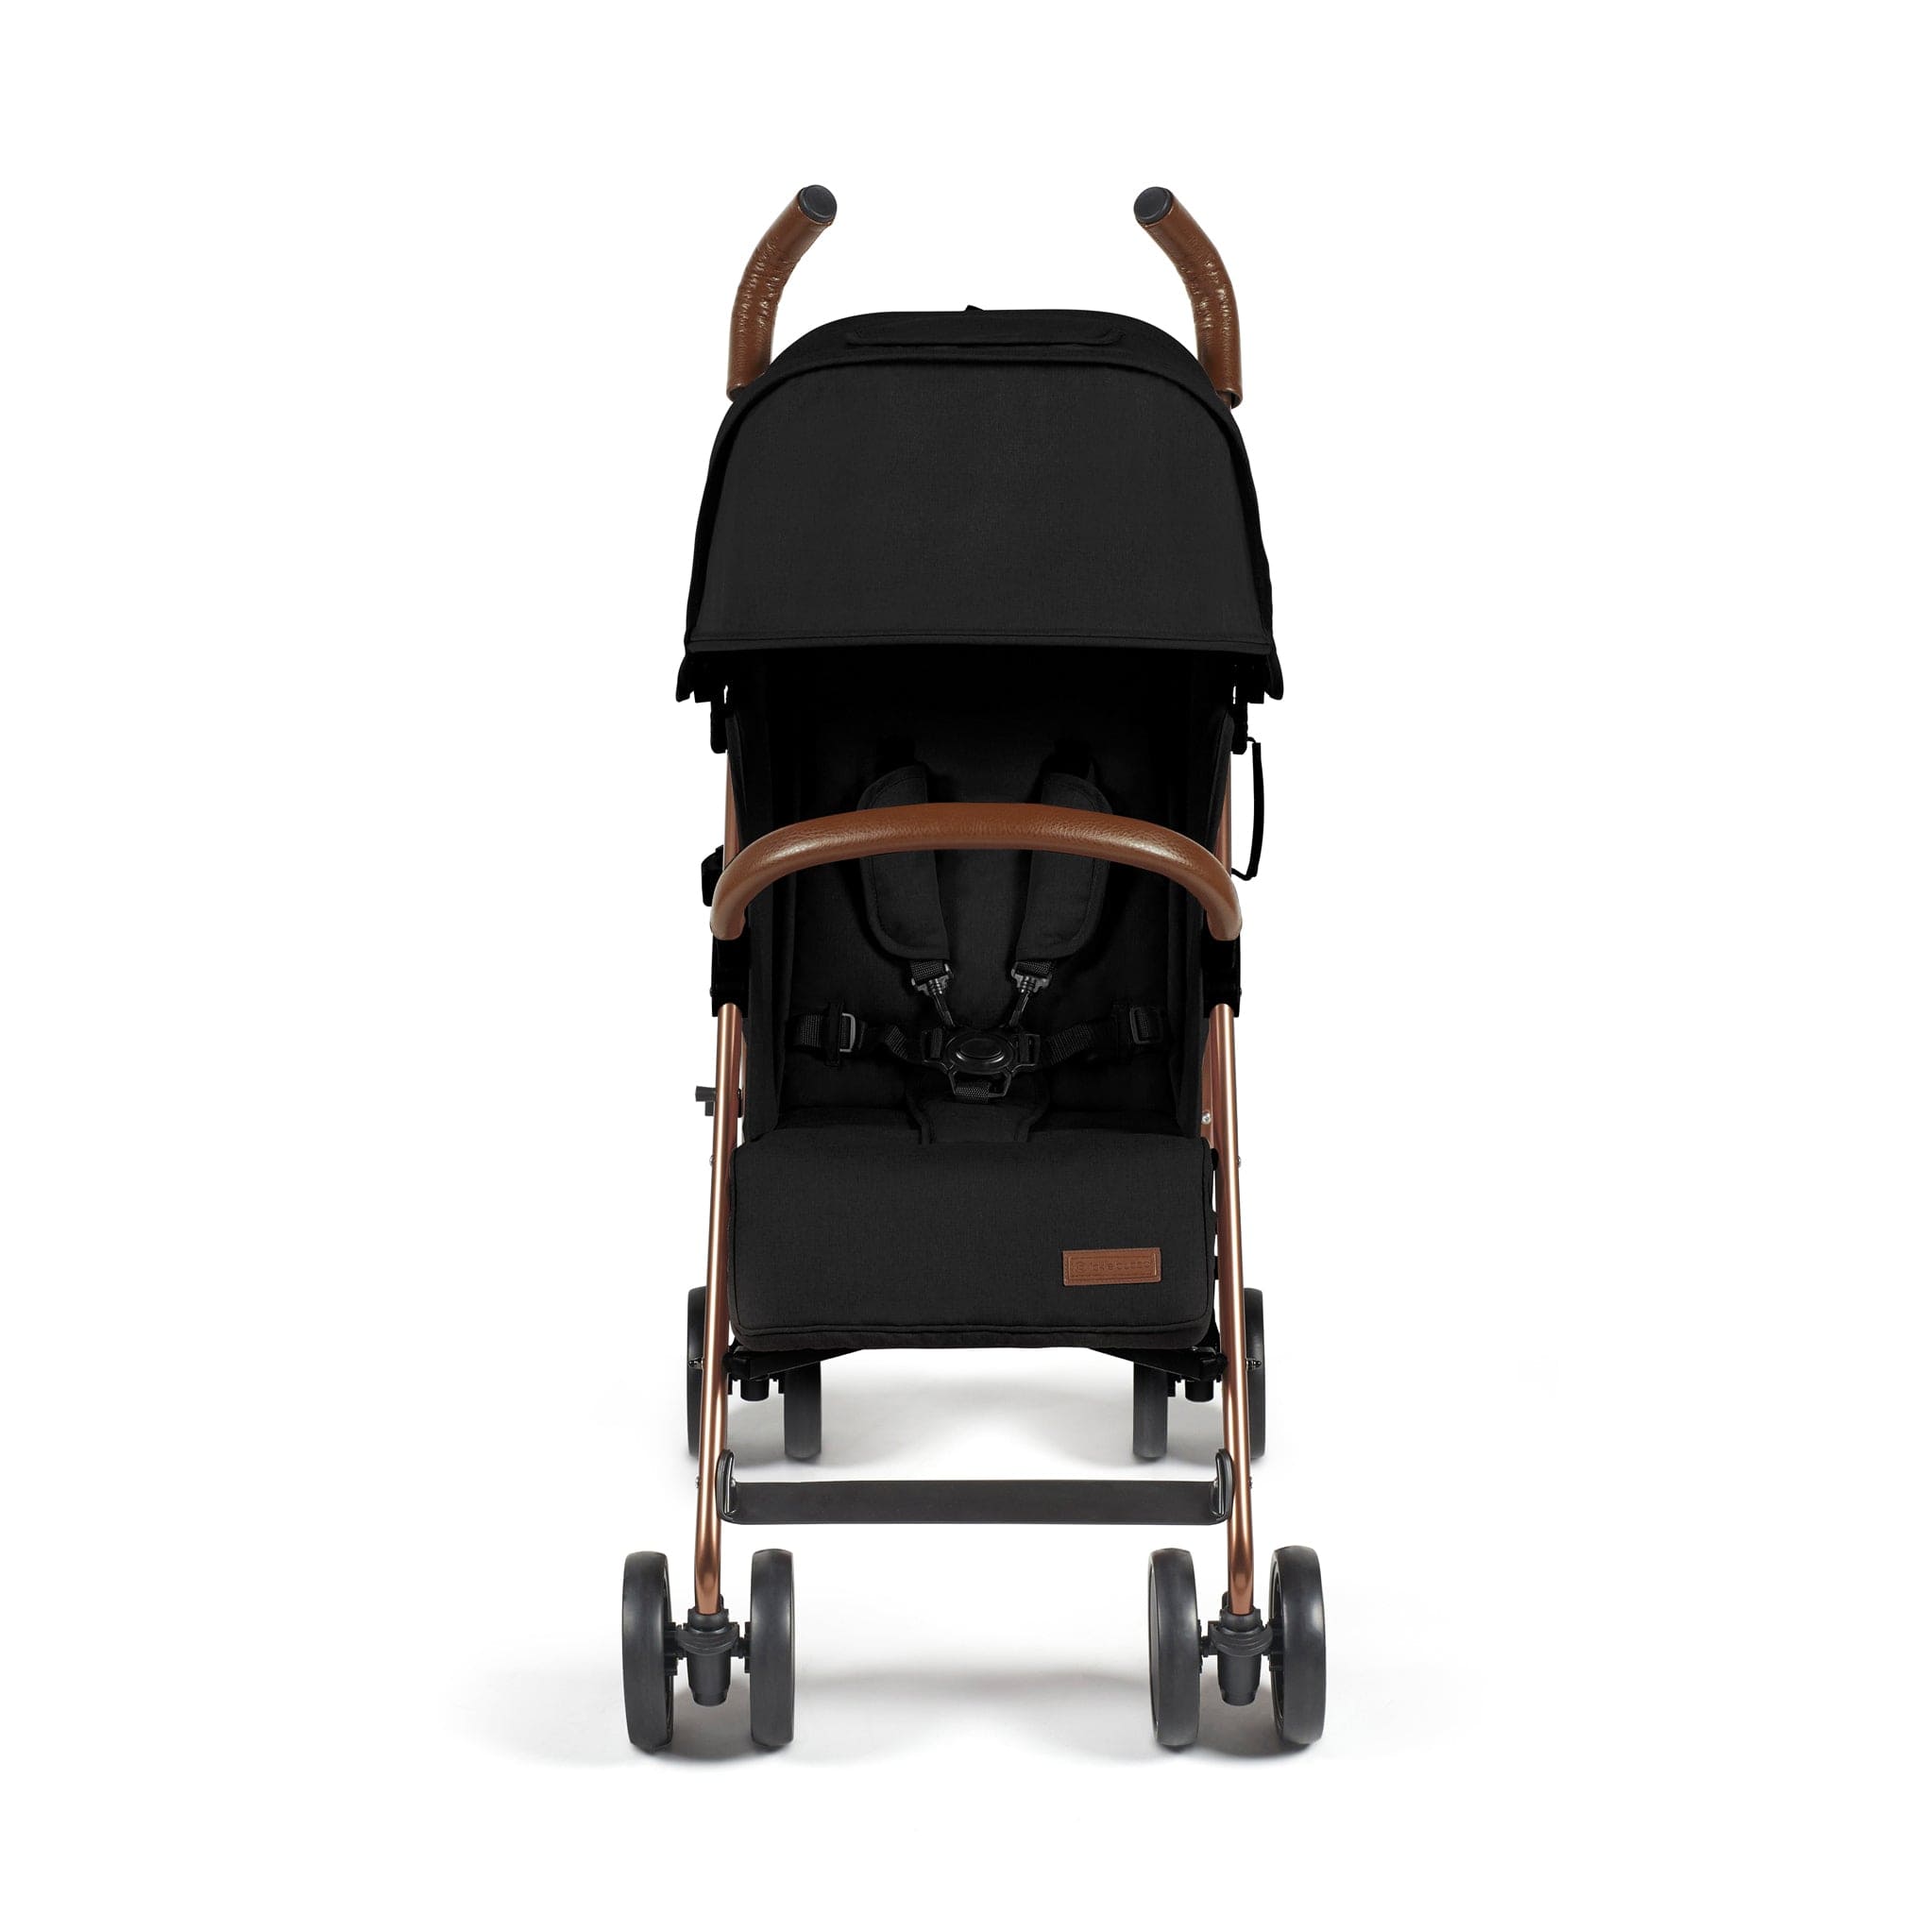 Ickle Bubba baby pushchairs Ickle Bubba Discovery Pushchair Rose Gold/Black 15-002-100-043